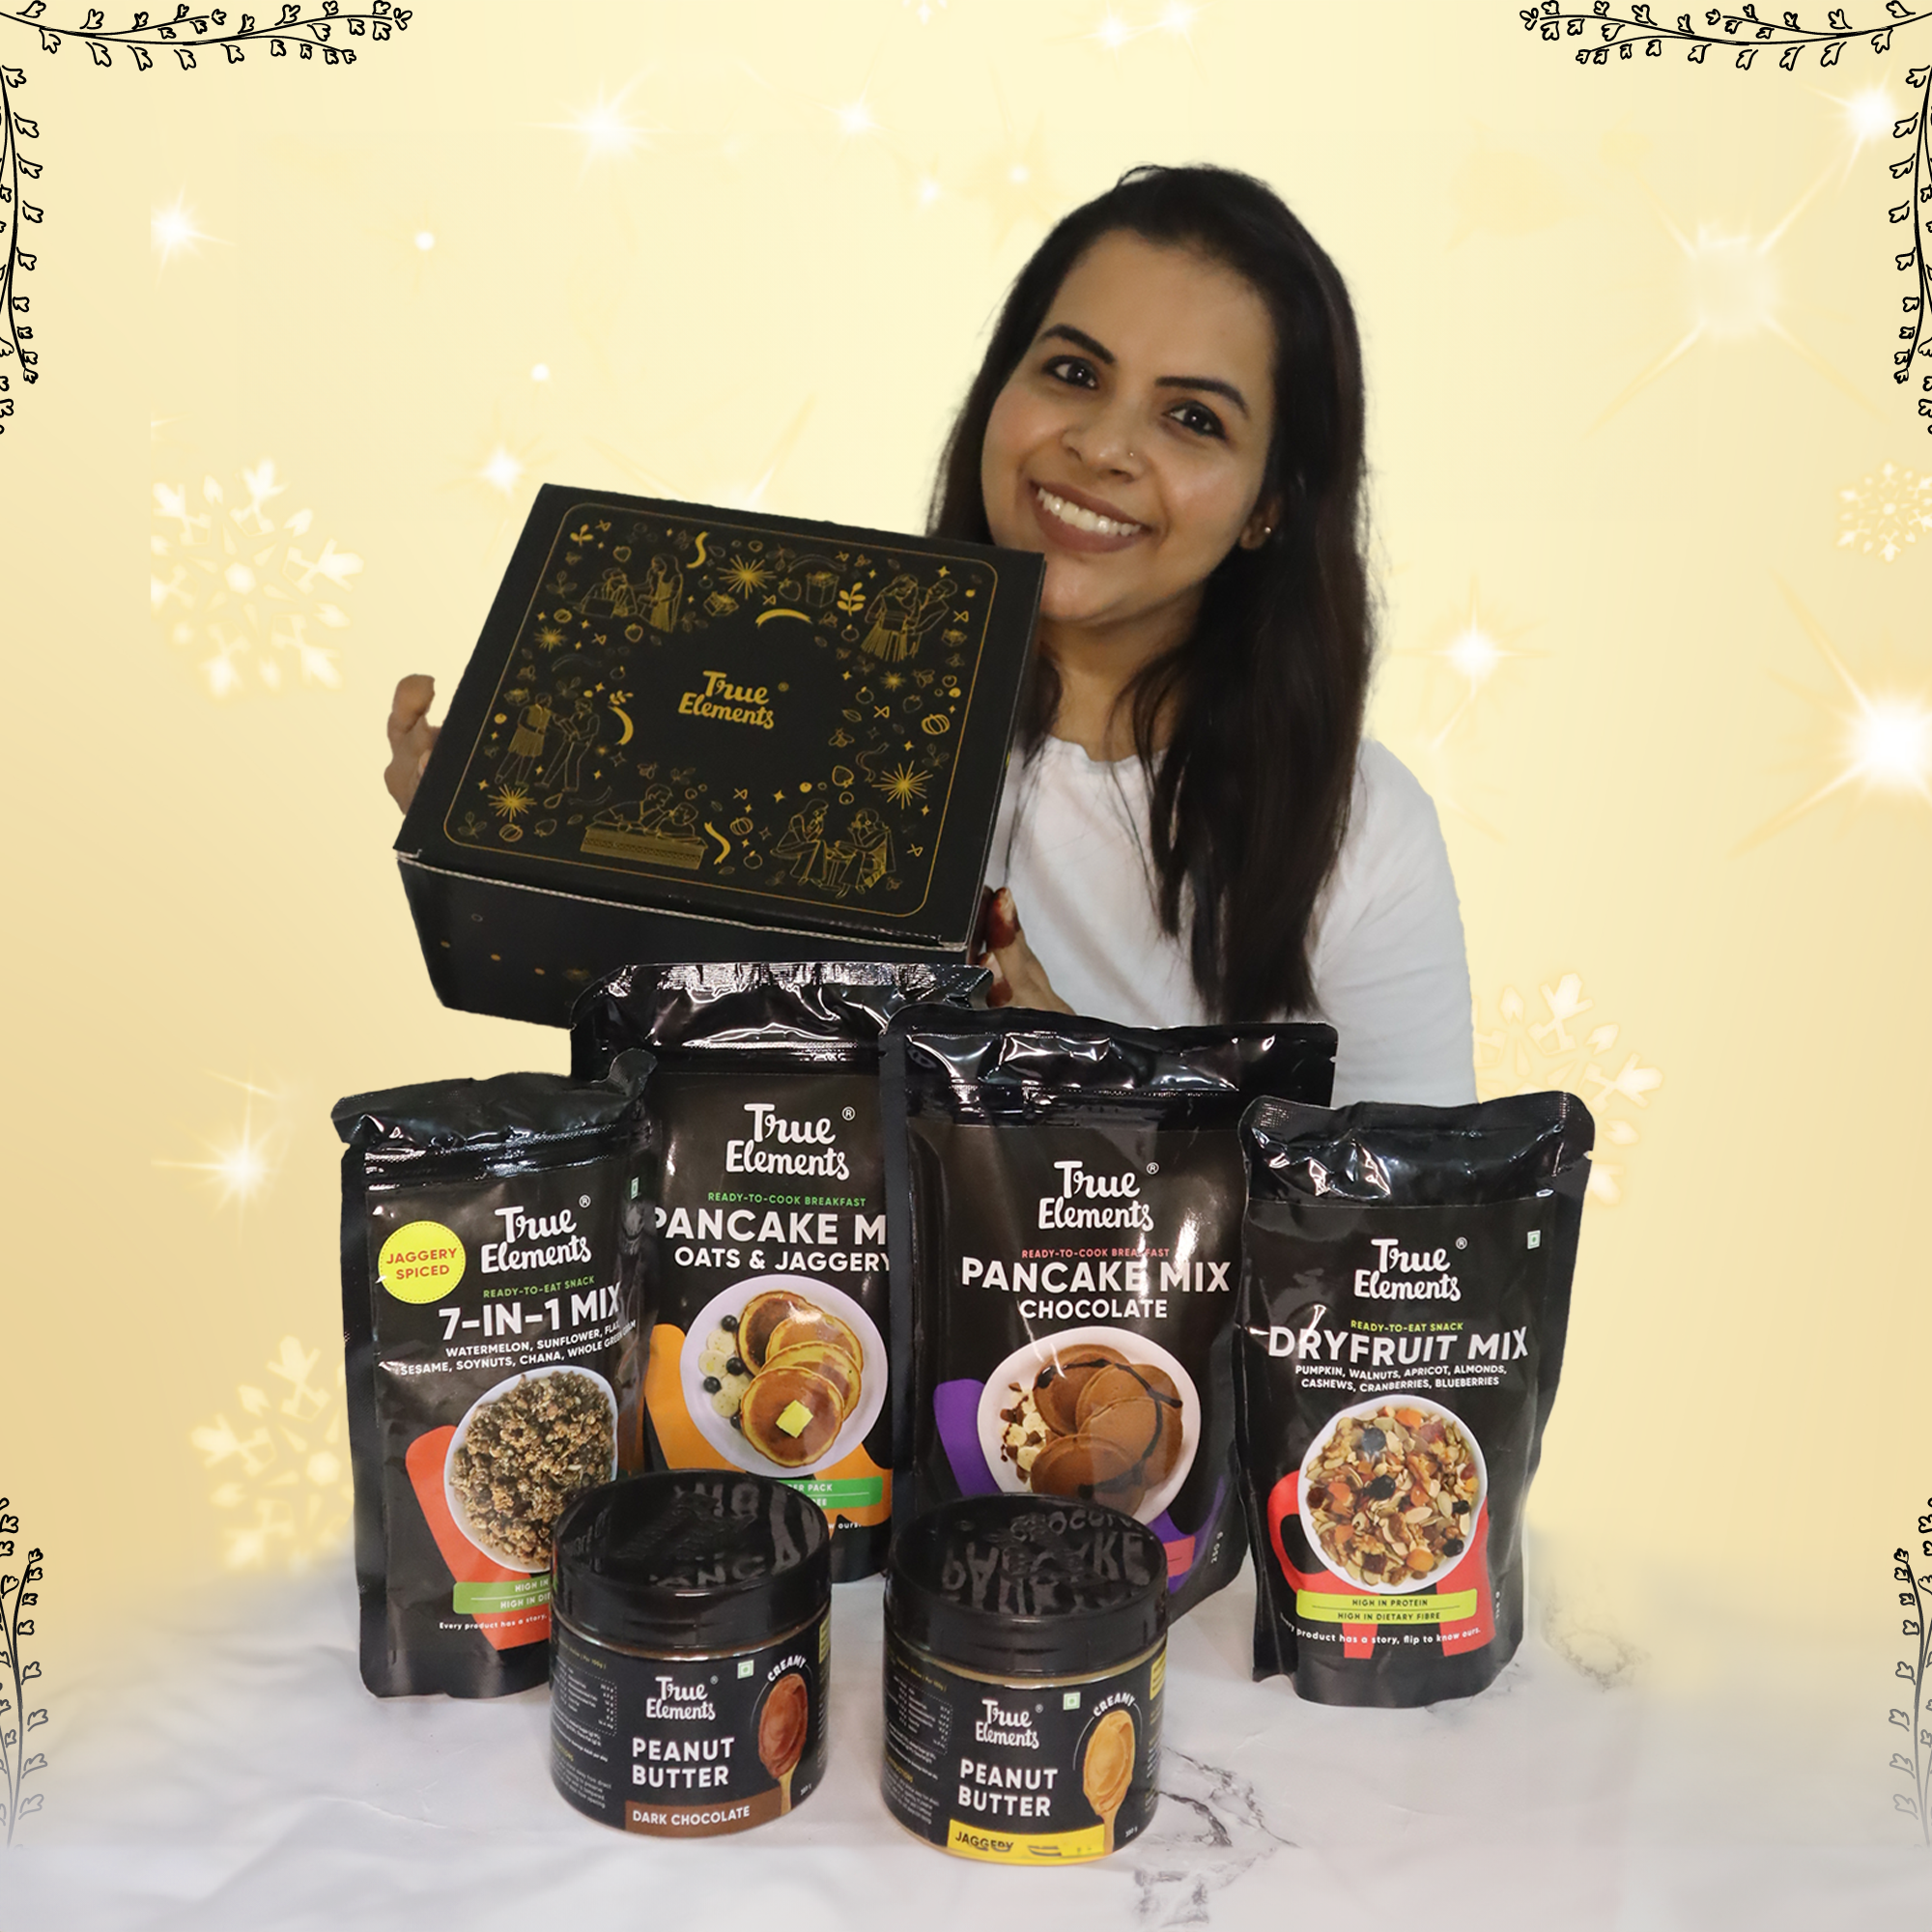 Sweet Delights Hamper Curated By Nutritionist Nayana Varrier